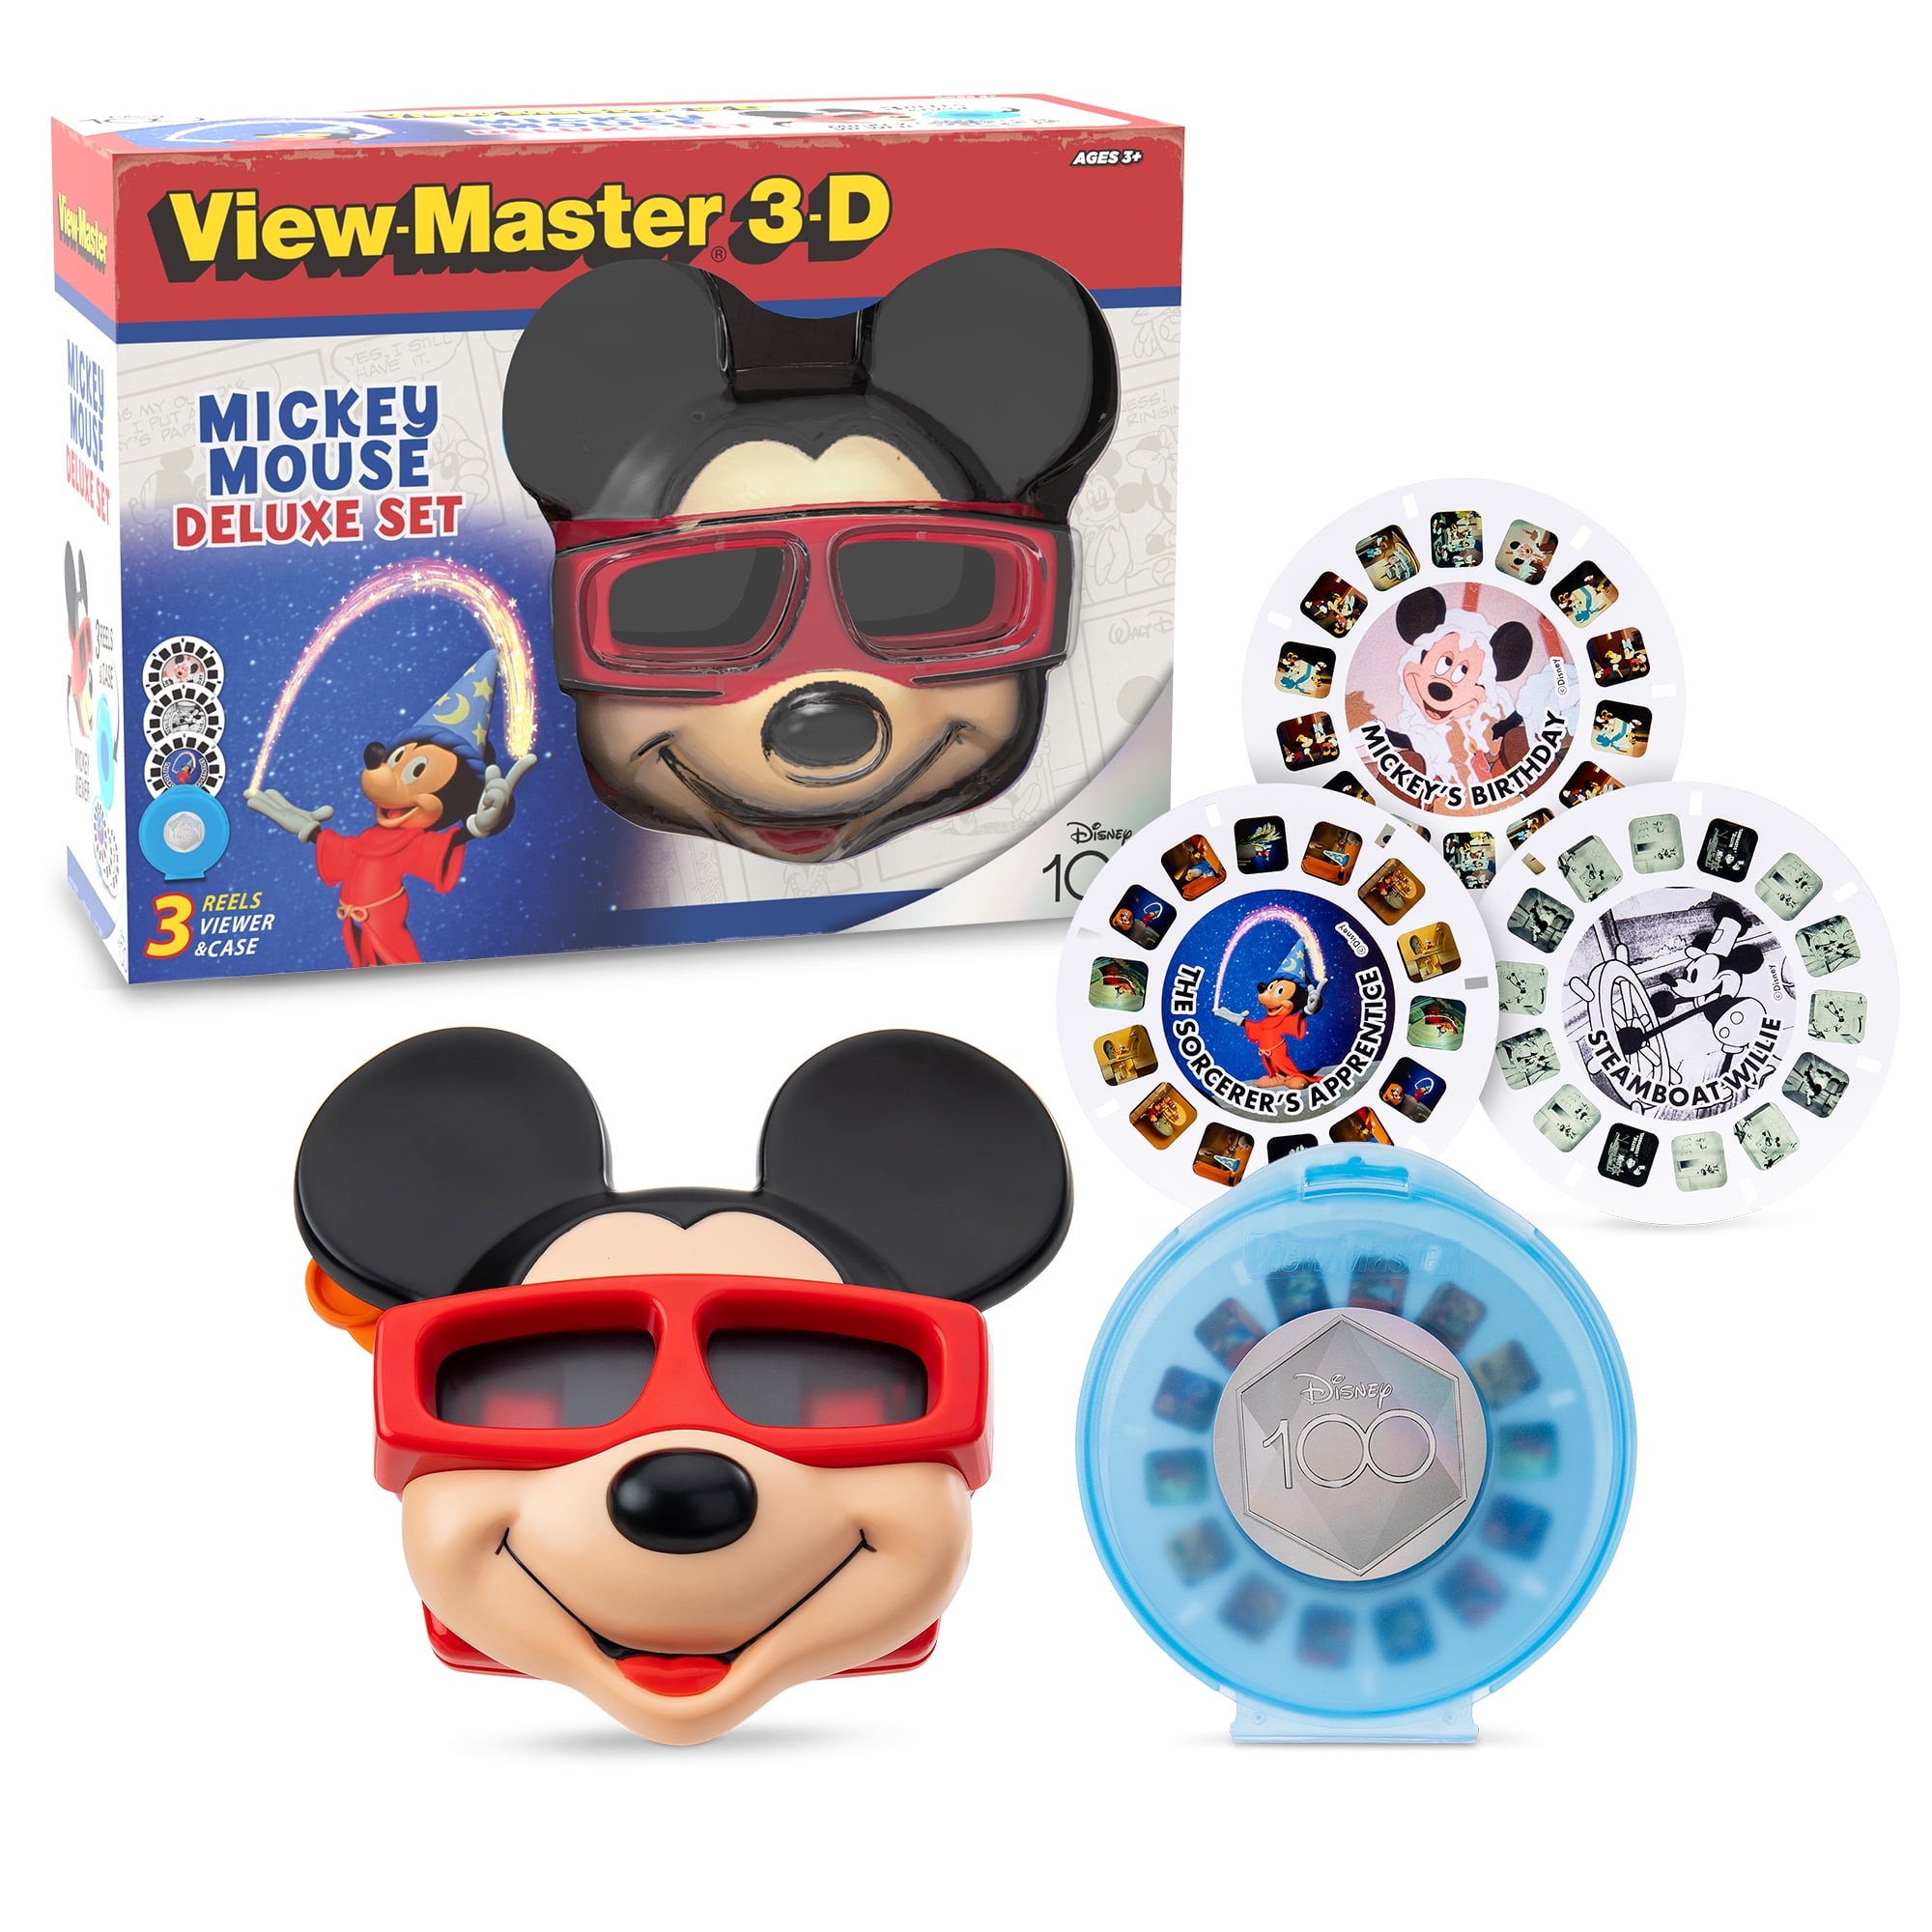 View-Master Disney 100 Mickey Mouse